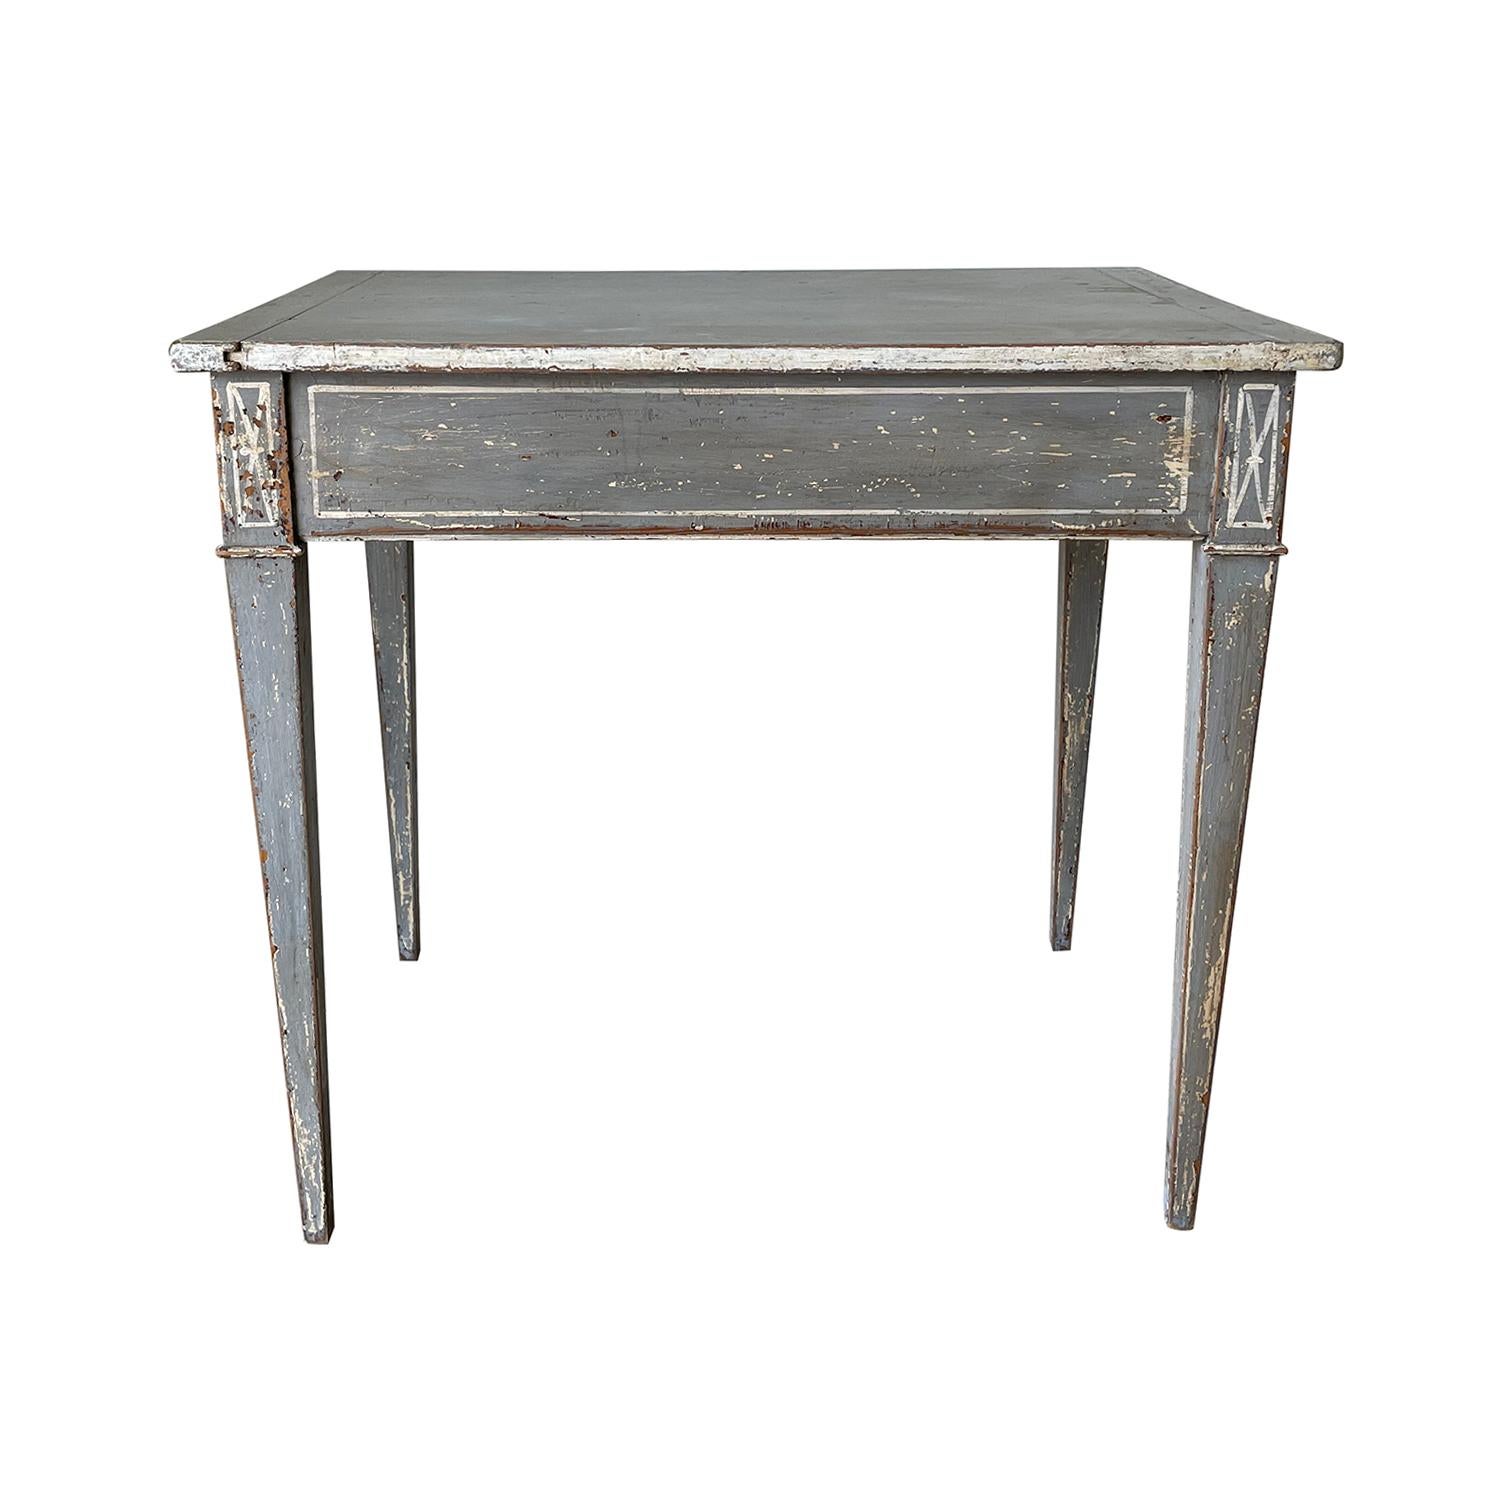 A dark-grey, antique Swedish Gustavian freestanding console table made of hand crafted painted Pinewood, in good condition. The small rectangular Scandinavian side, end table is standing on four straight, square tapered fluted legs, enhanced by